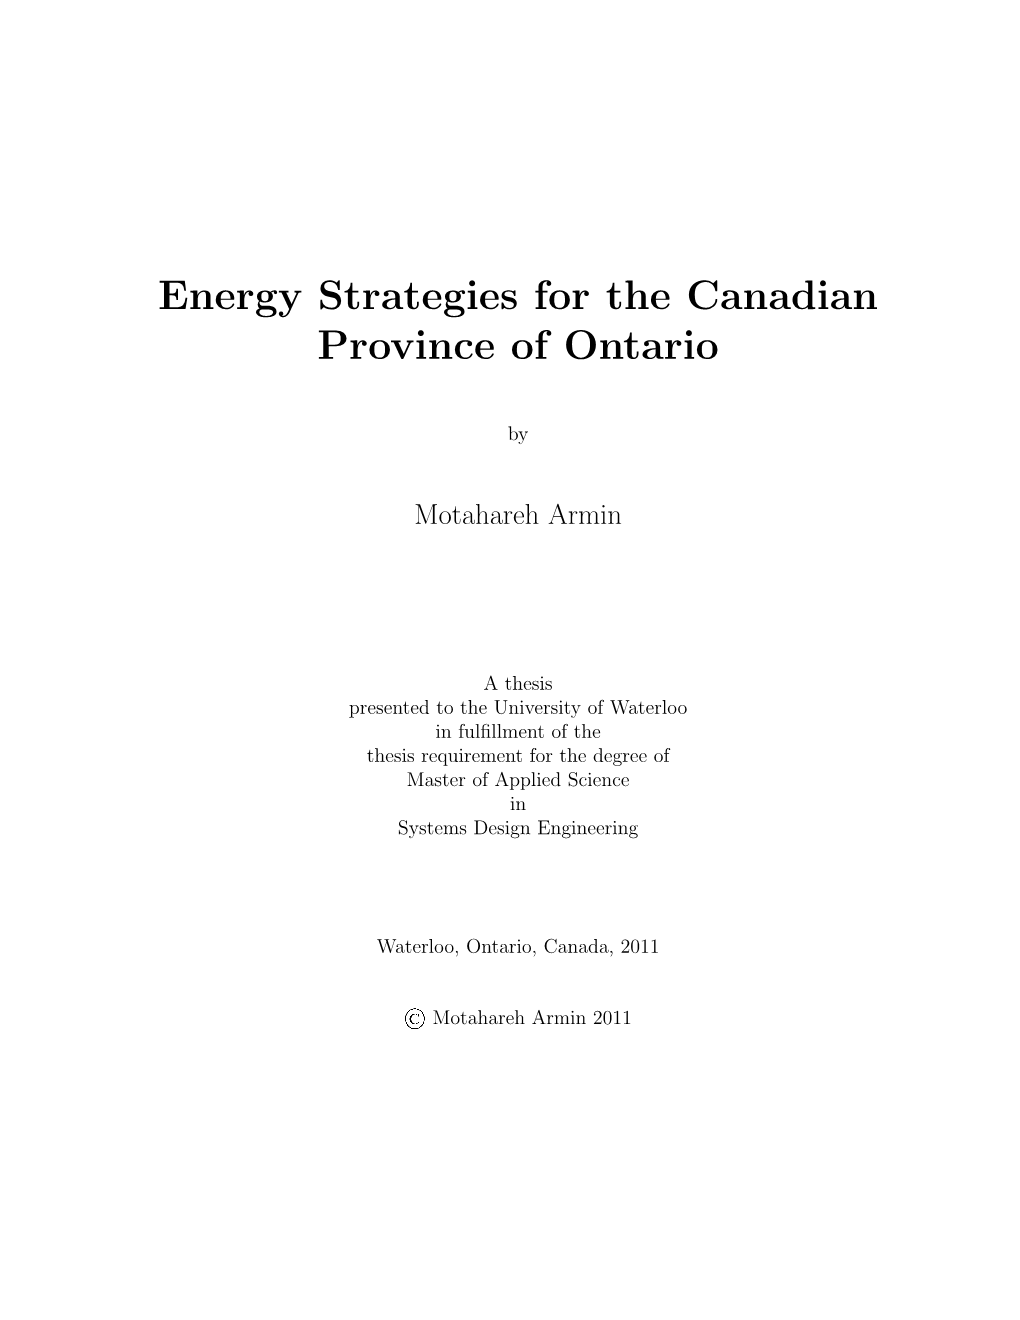 Energy Strategies for the Canadian Province of Ontario